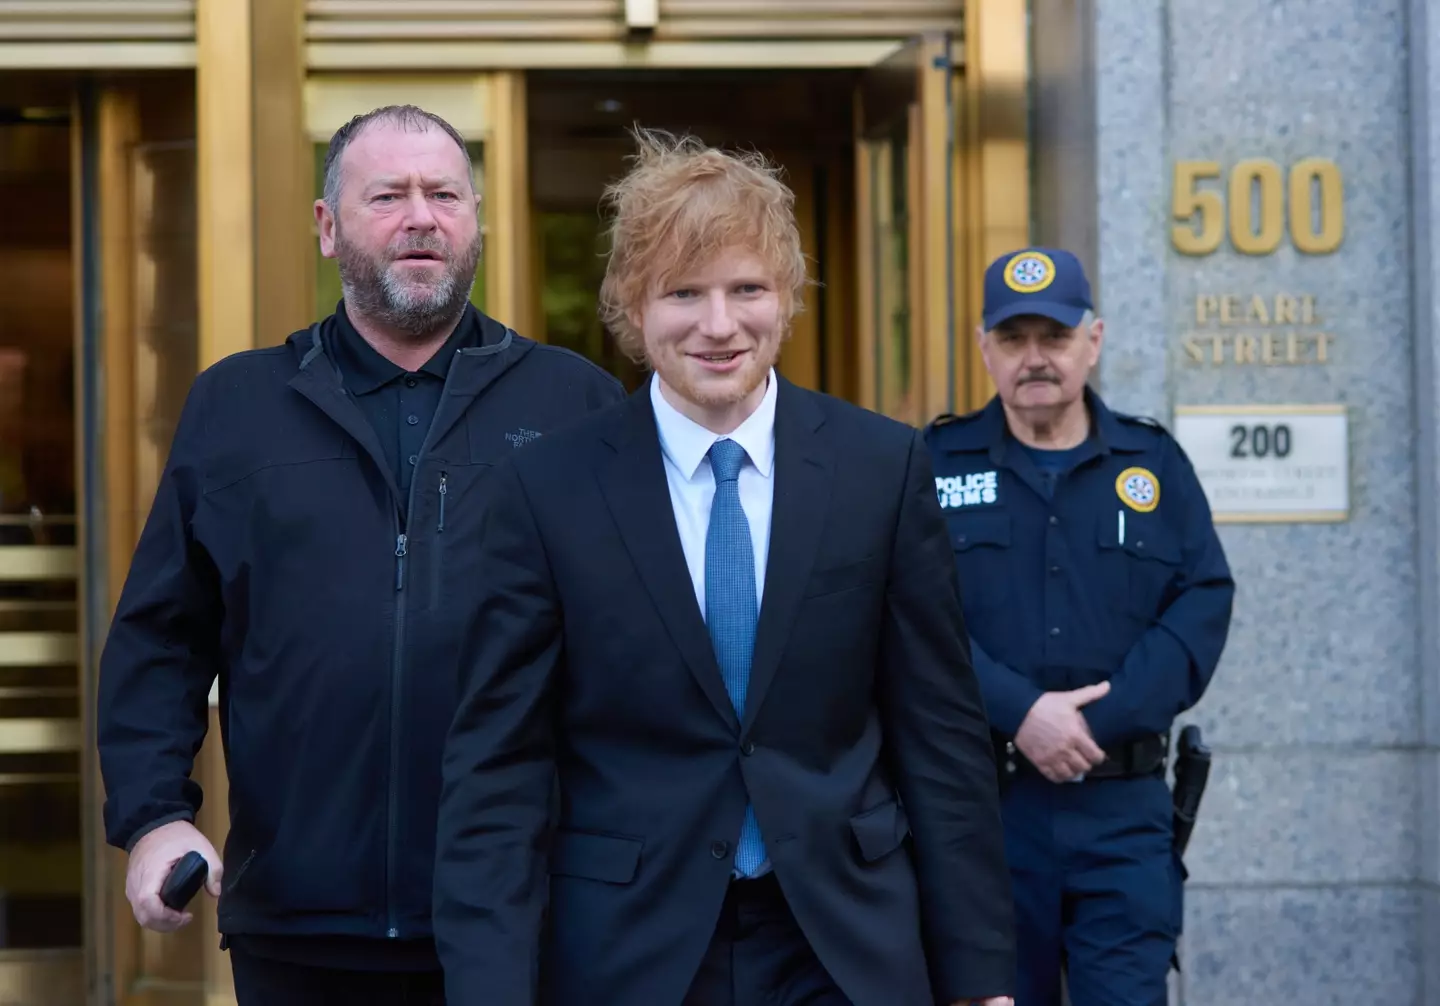 Ed Sheeran has been in court this week for a copyright infringement trial.